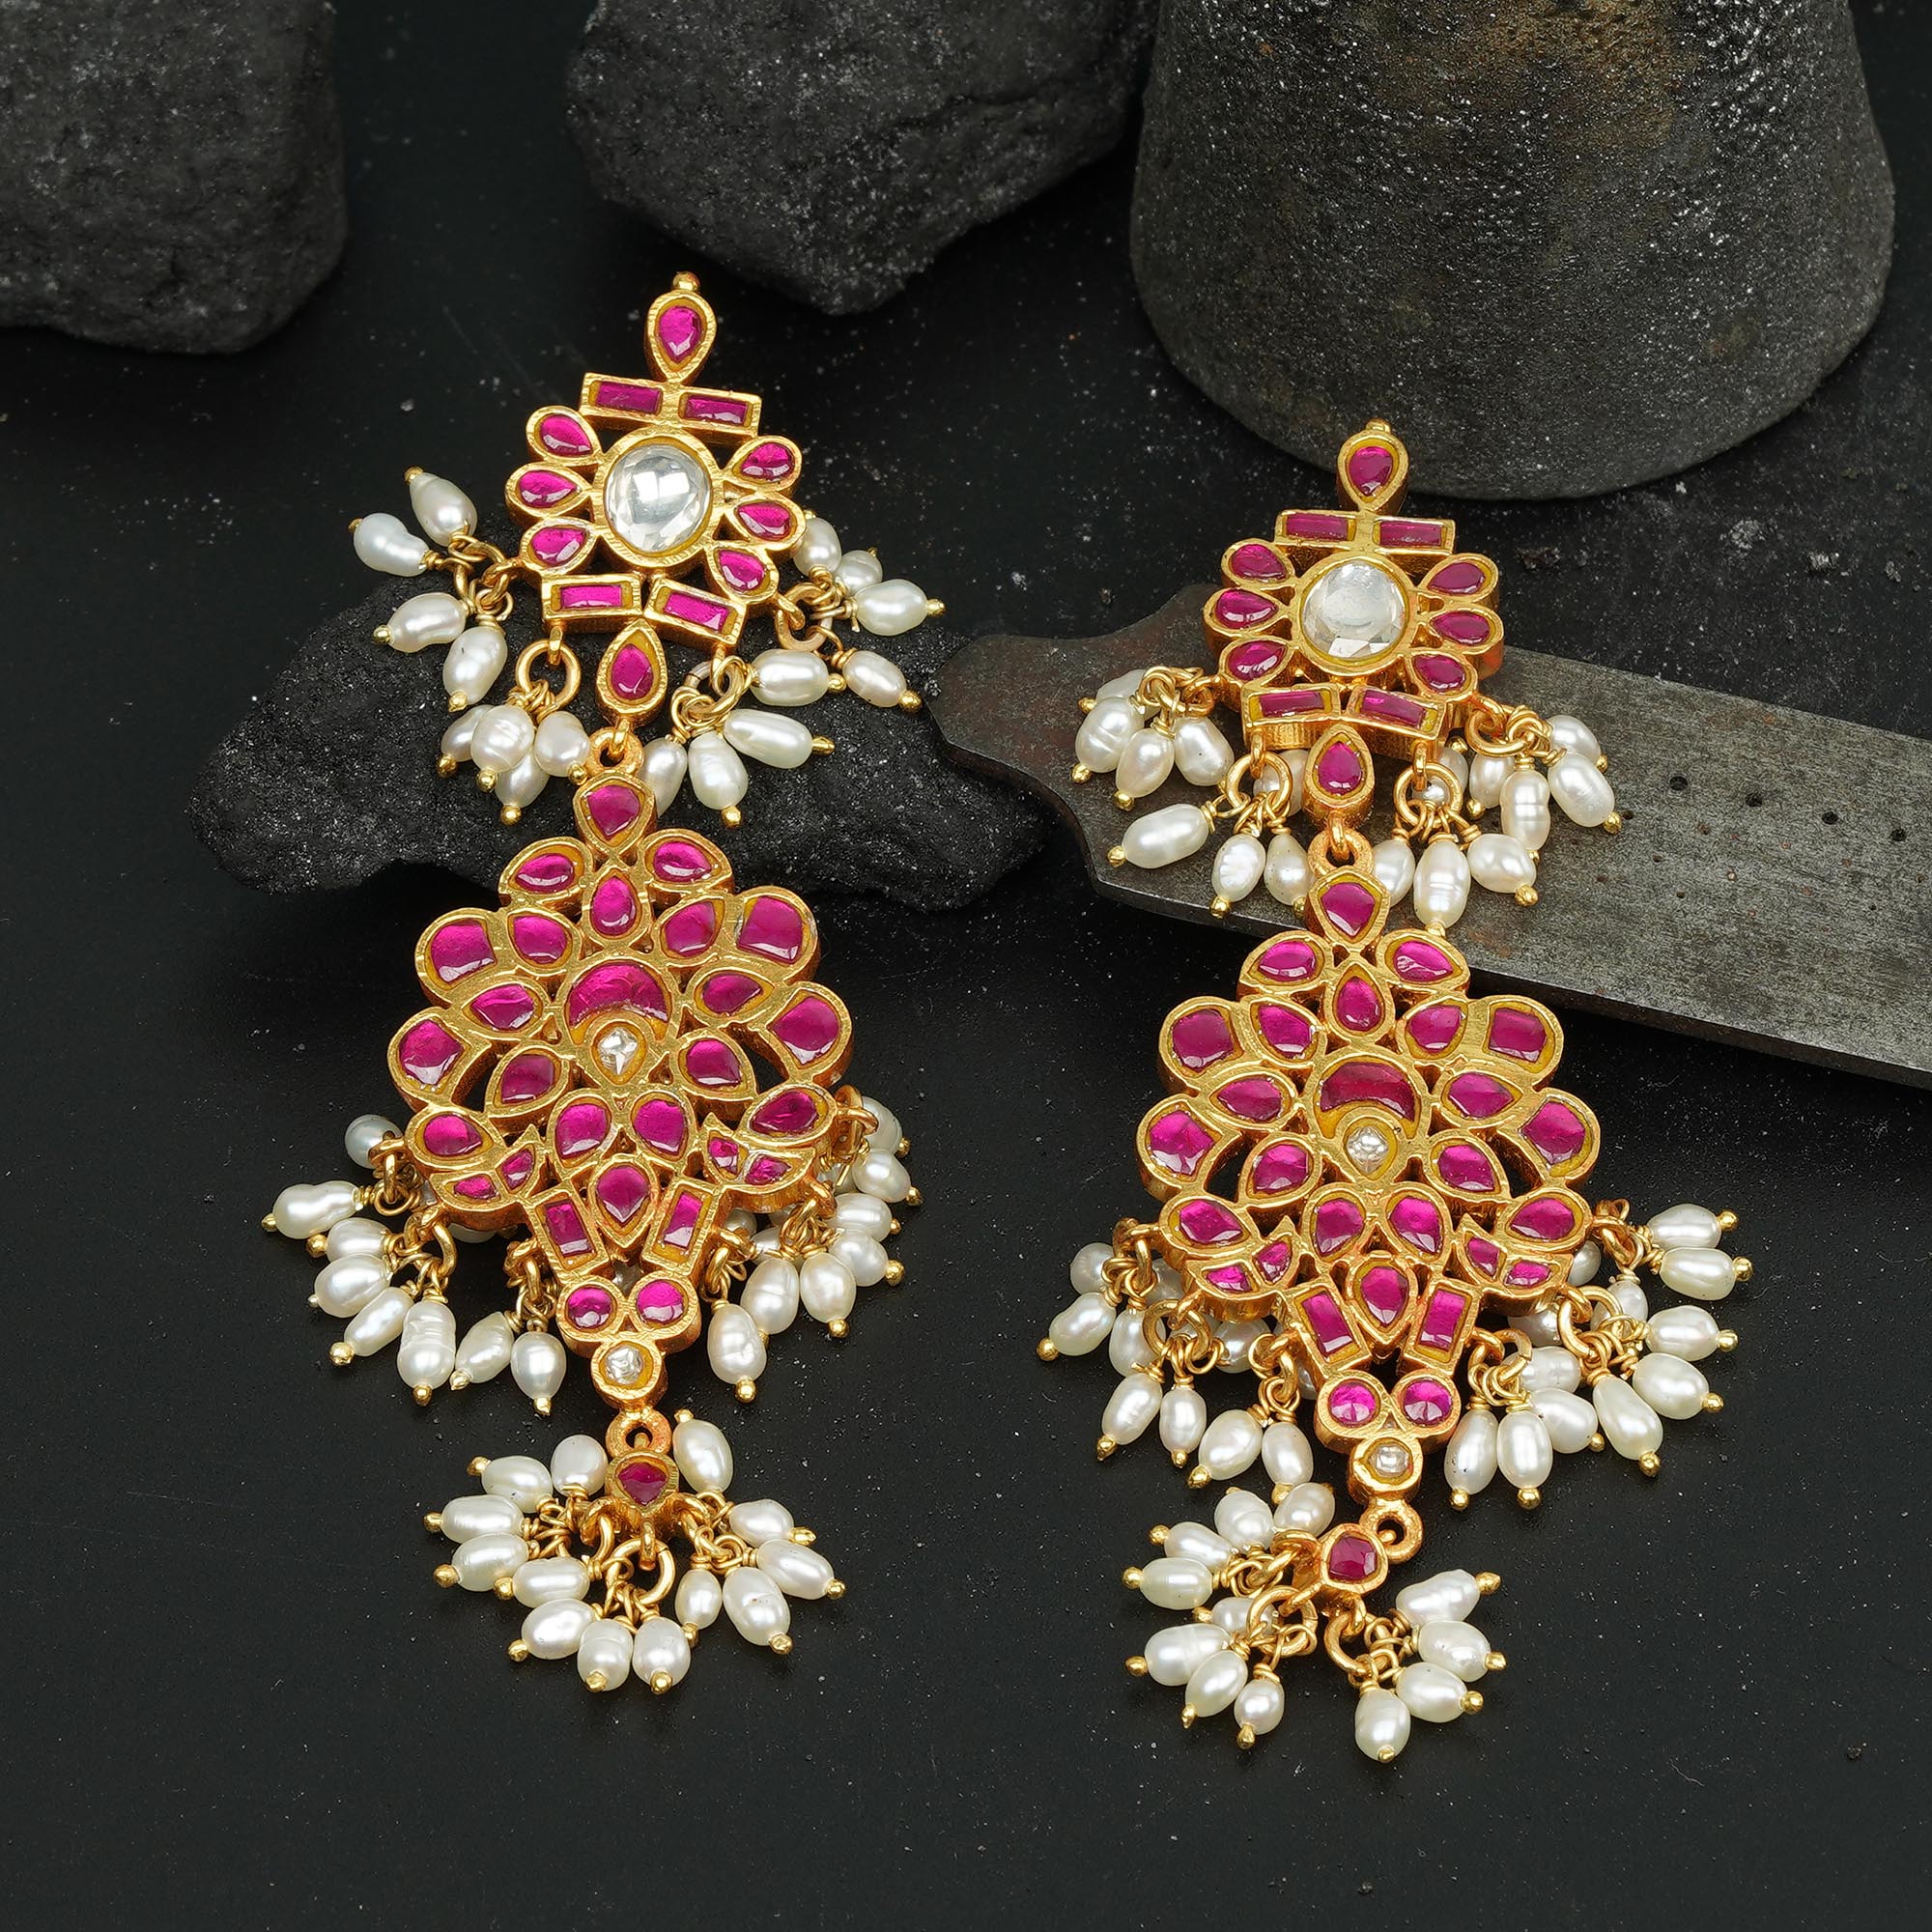 Buy the Best Earrings for women and Girls Online At Best Prices